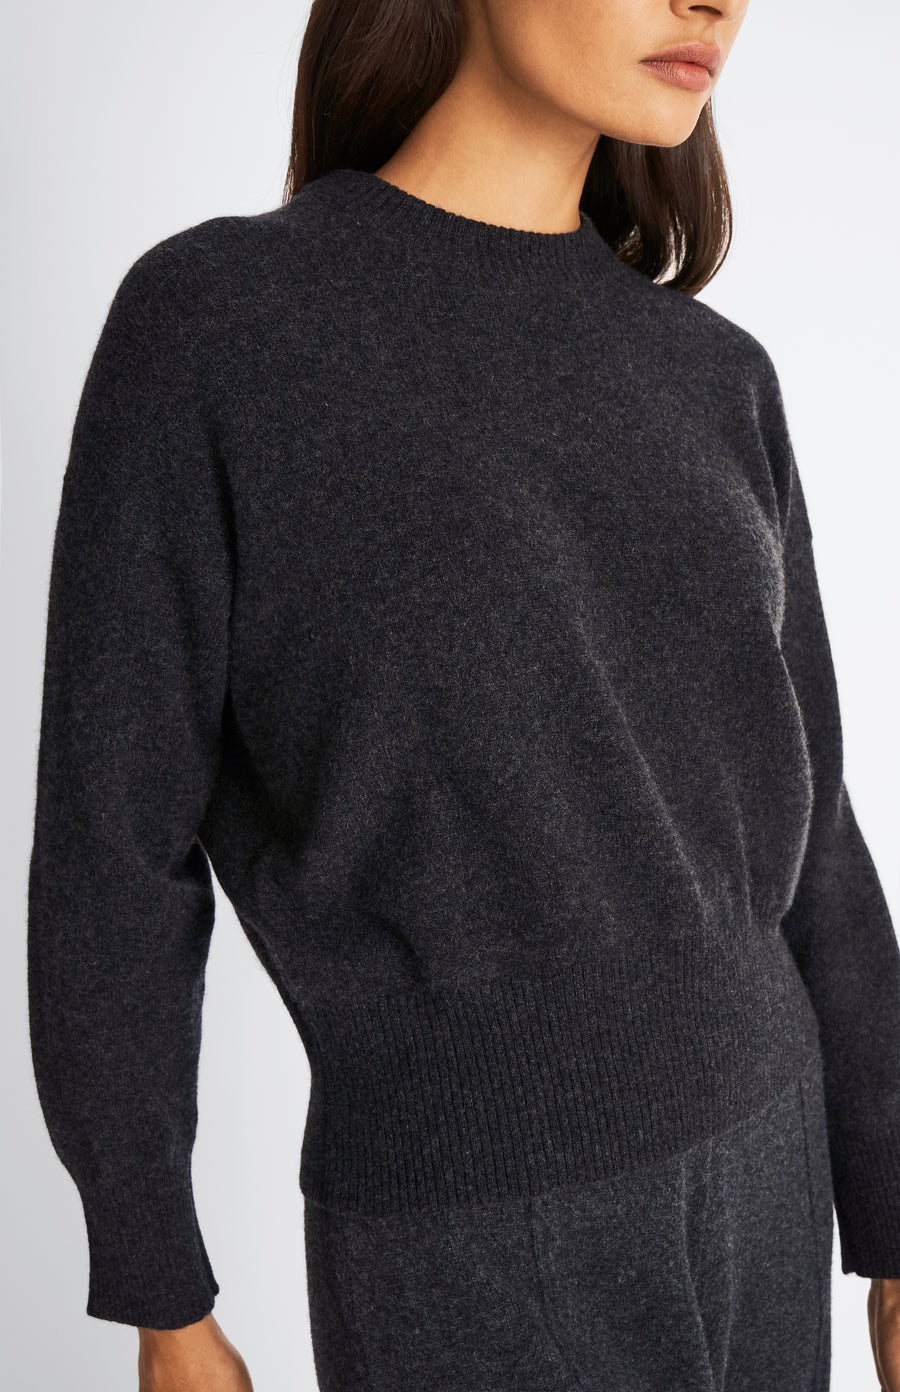  Pringle of Scotland Women's Lightweight Cashmere Jumper in Charcoal showing neck detail